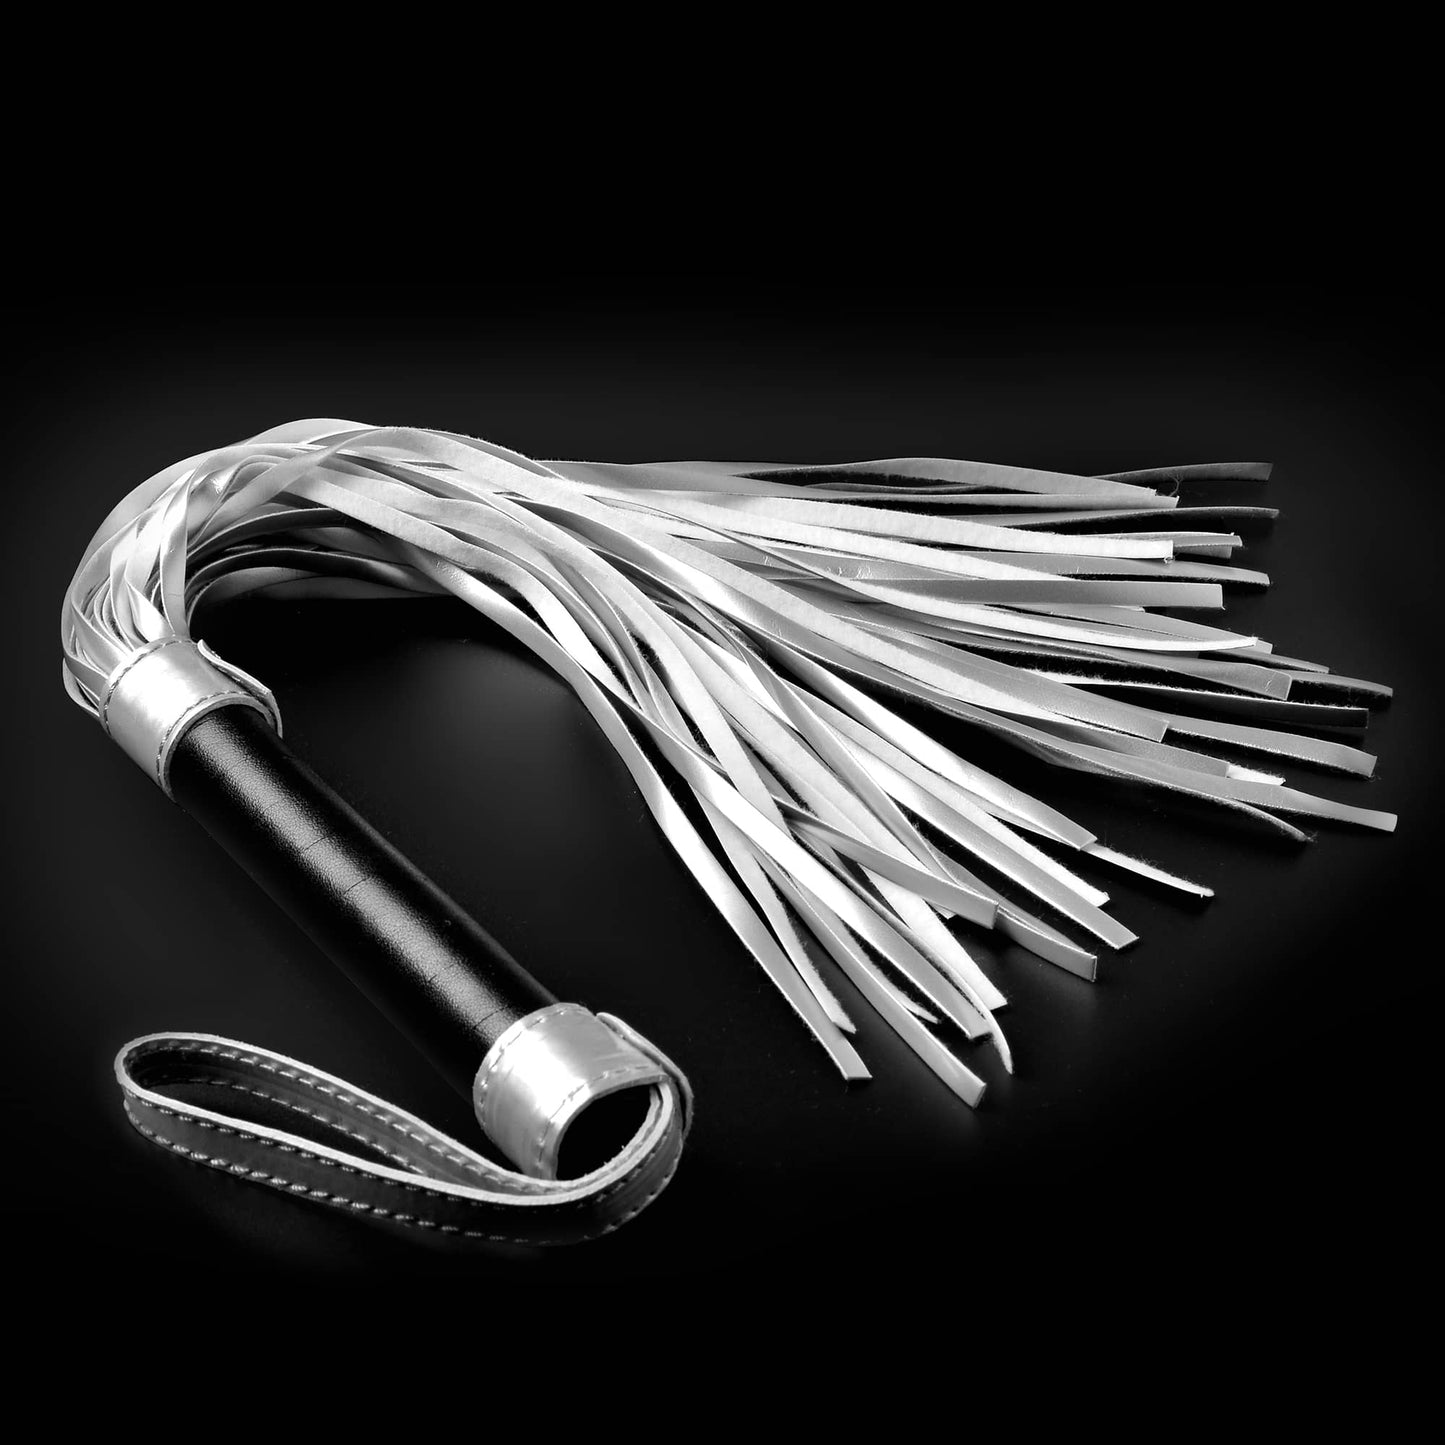 The bdsm sex whip flogger for kinky play exudes charm with its blend of black and silver